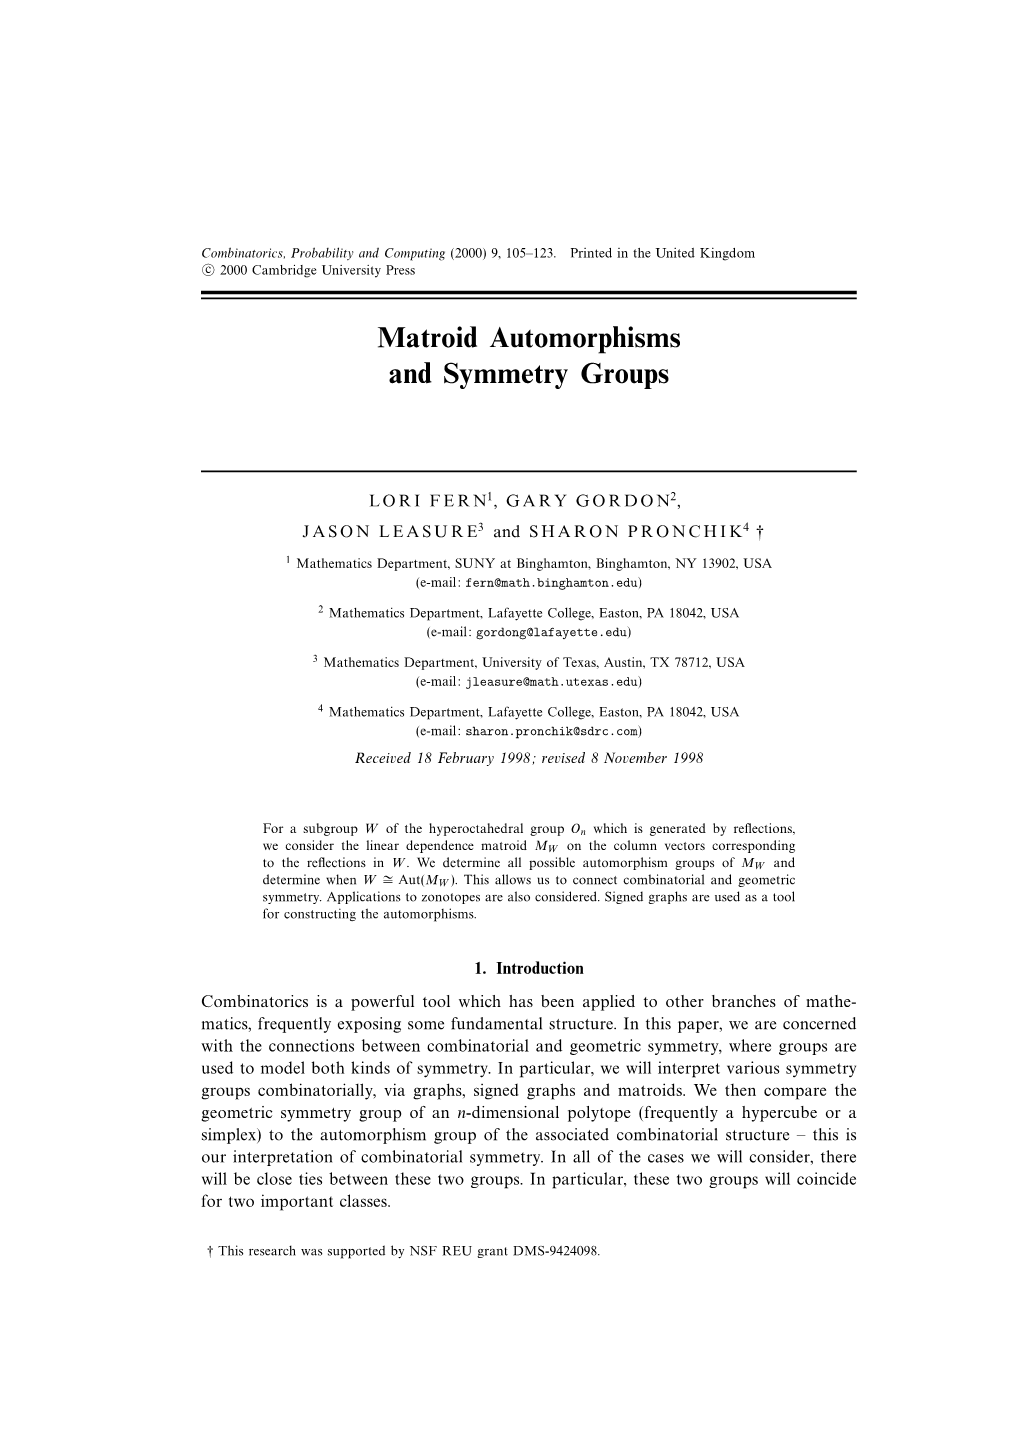 Matroid Automorphisms and Symmetry Groups